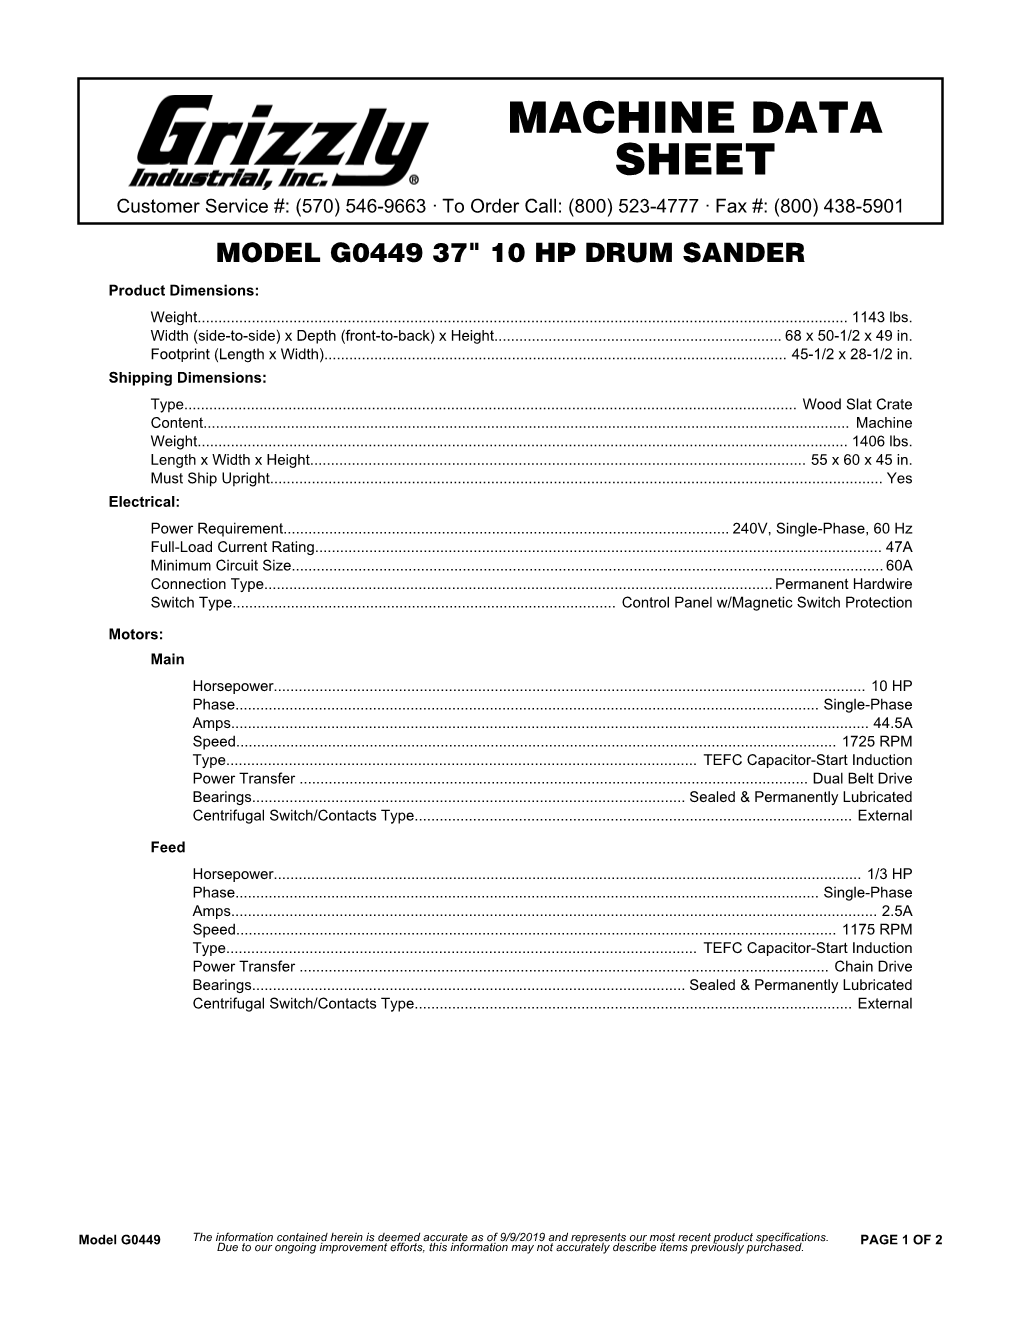 G0449 Specifications Sheet